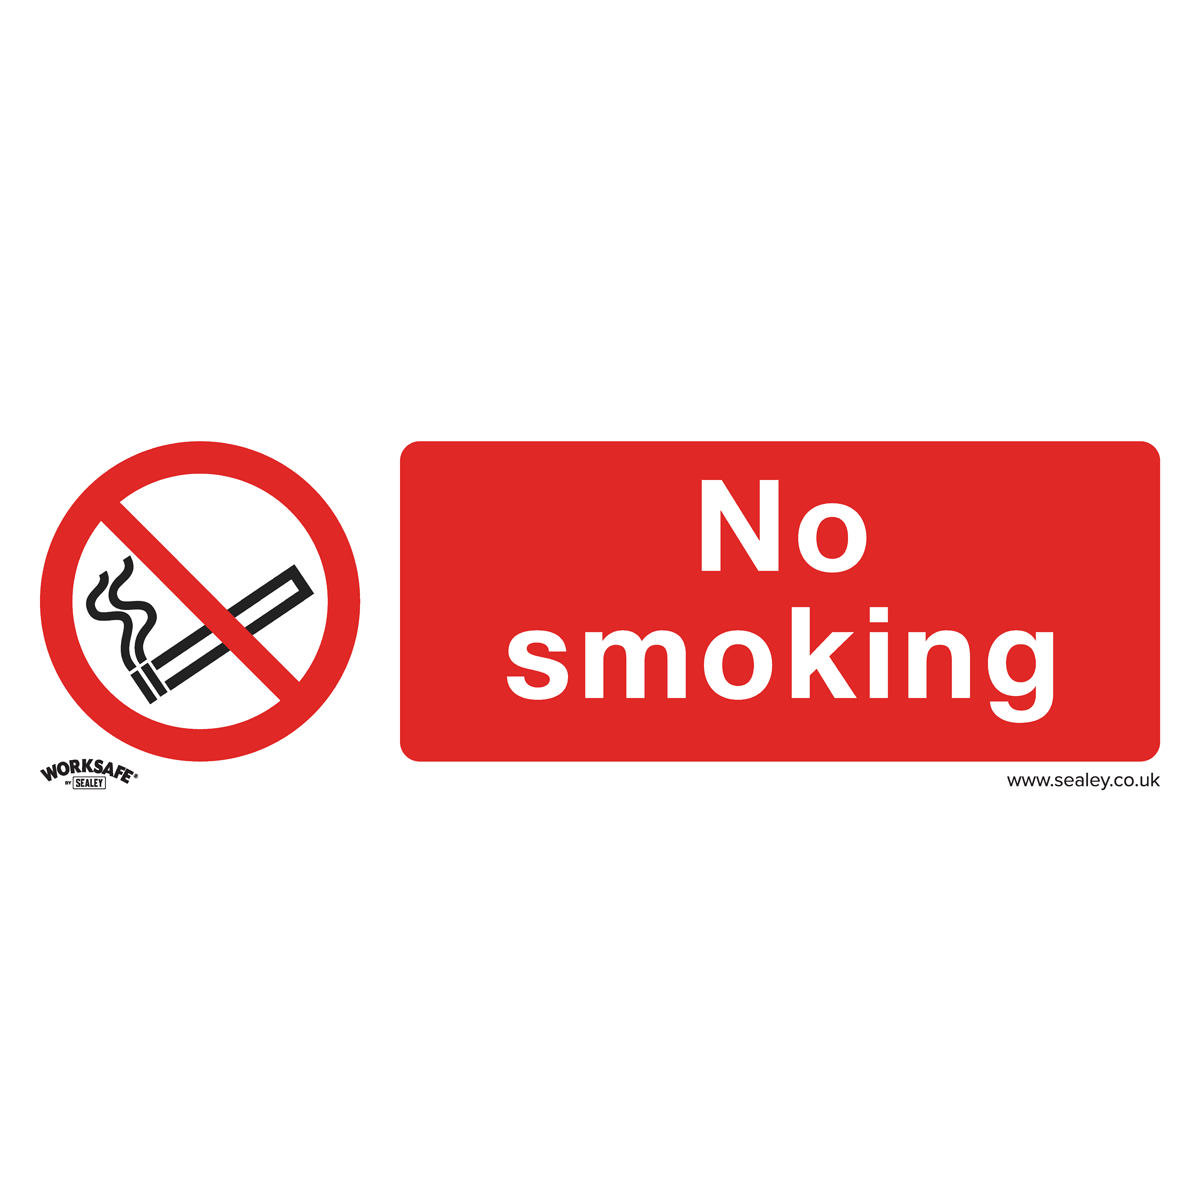 Sealey Prohibition Safety Sign - No Smoking - Self-Adhesive Vinyl - Pack of 10